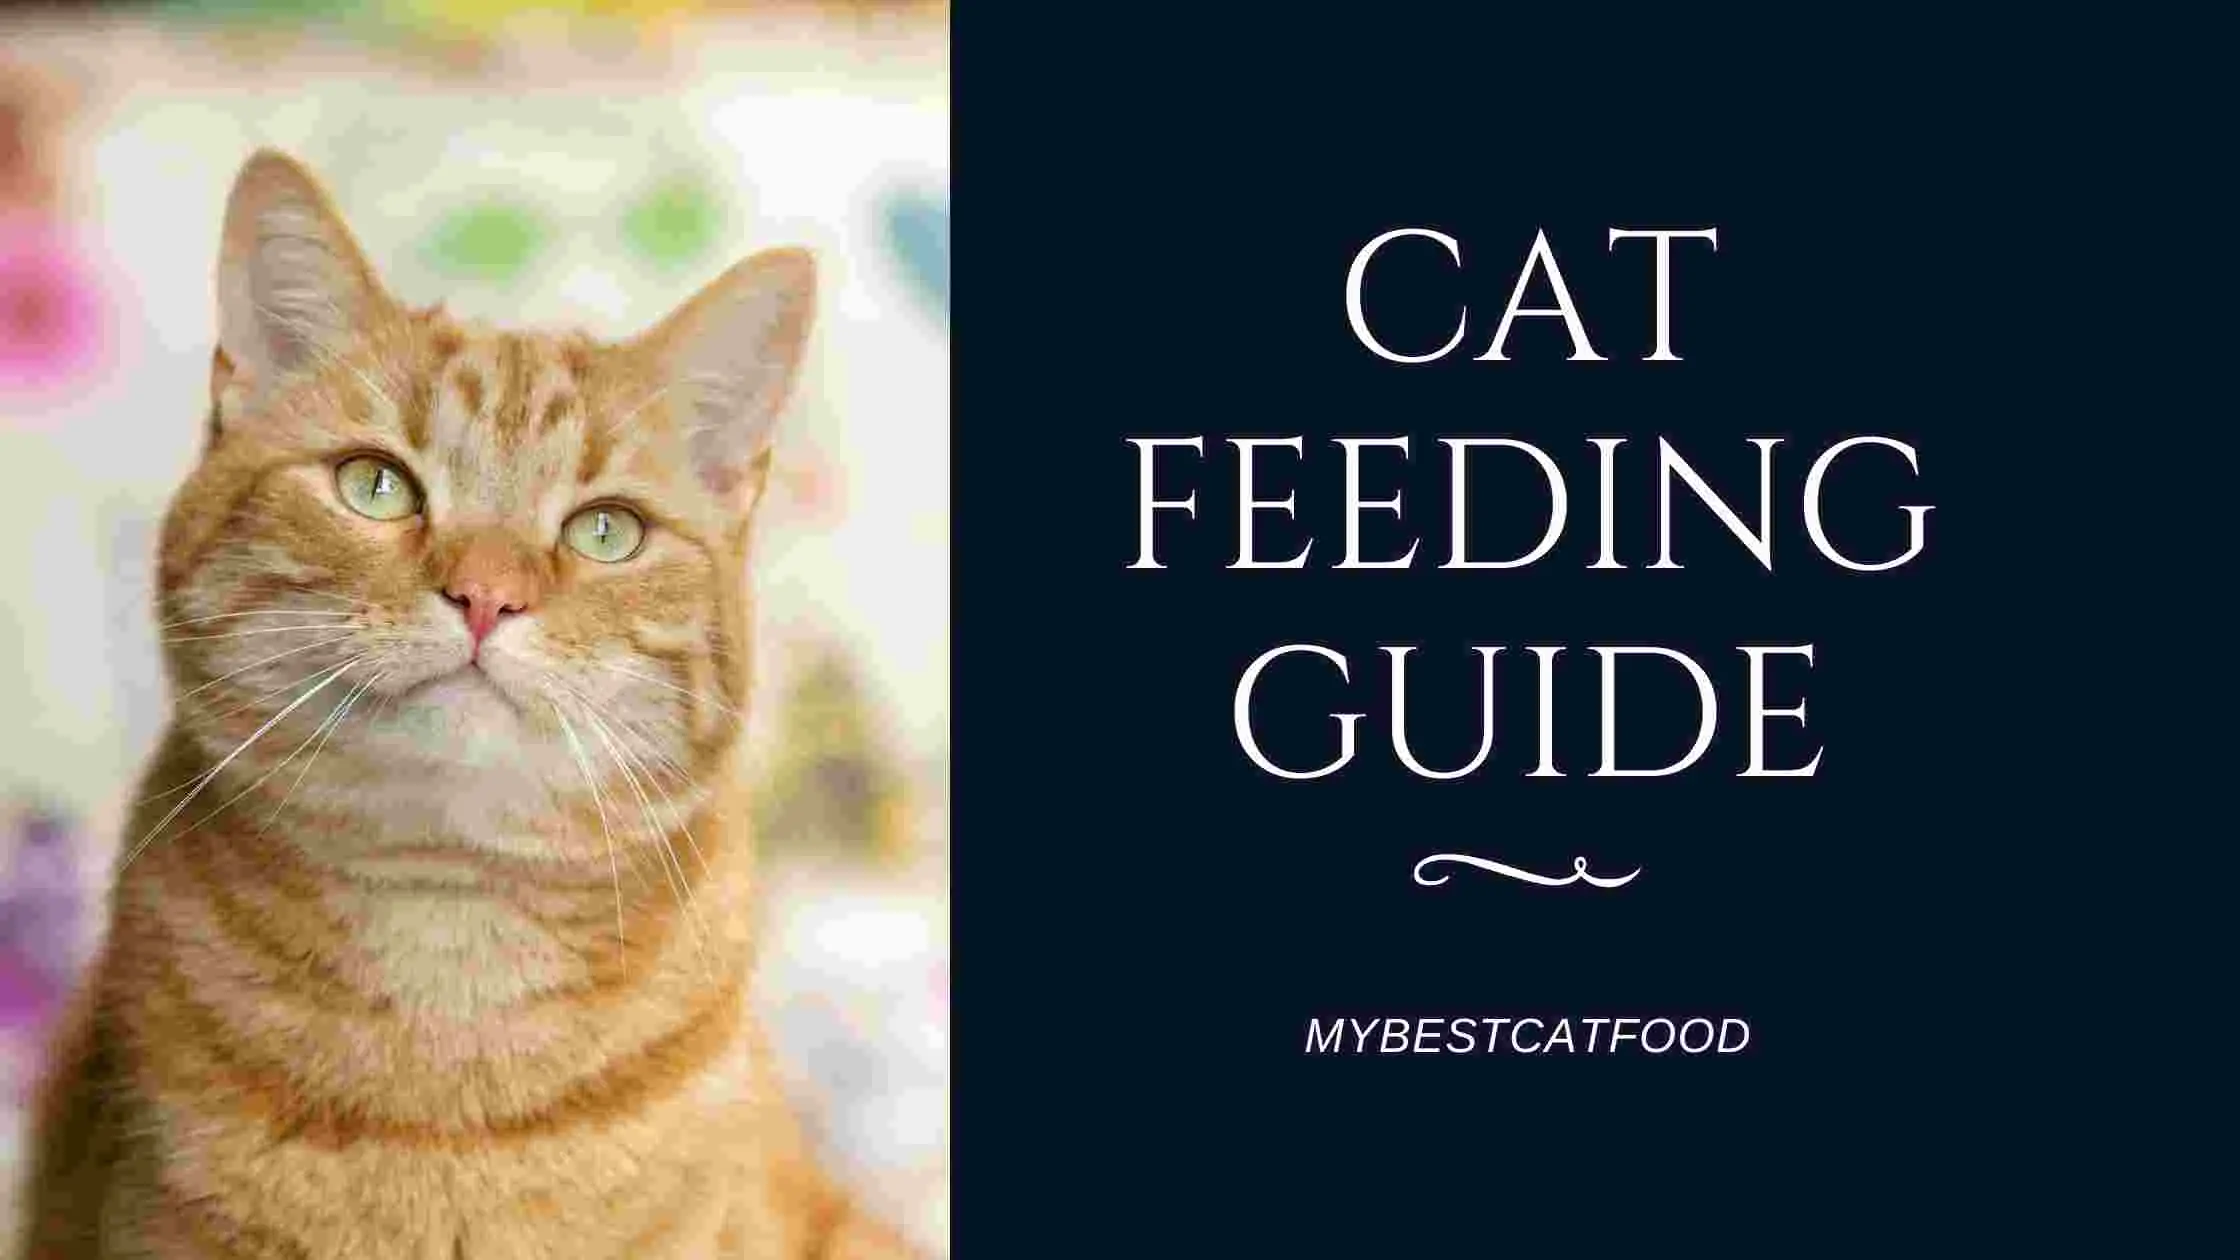 CAt Feeding Guide by age and weight